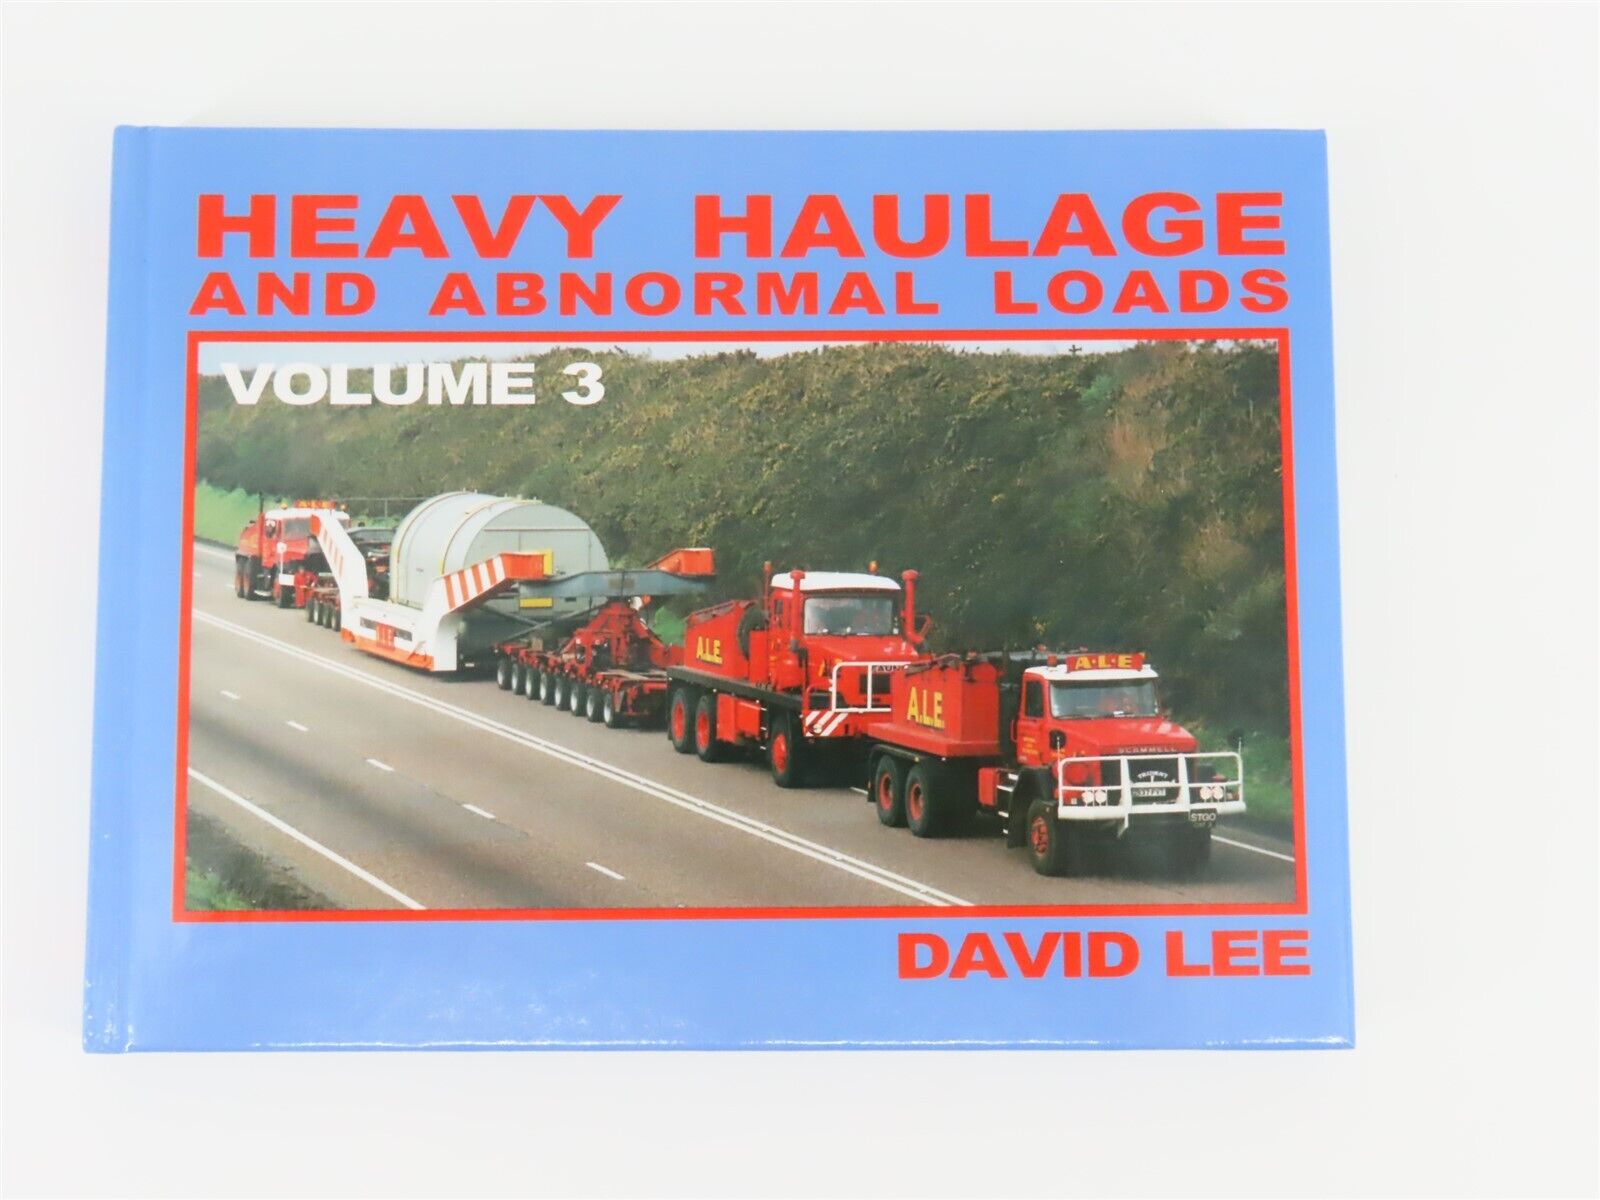 Heavy Haulage And Abnormal Loads Volume 3 by David Lee ©1997 HC Book